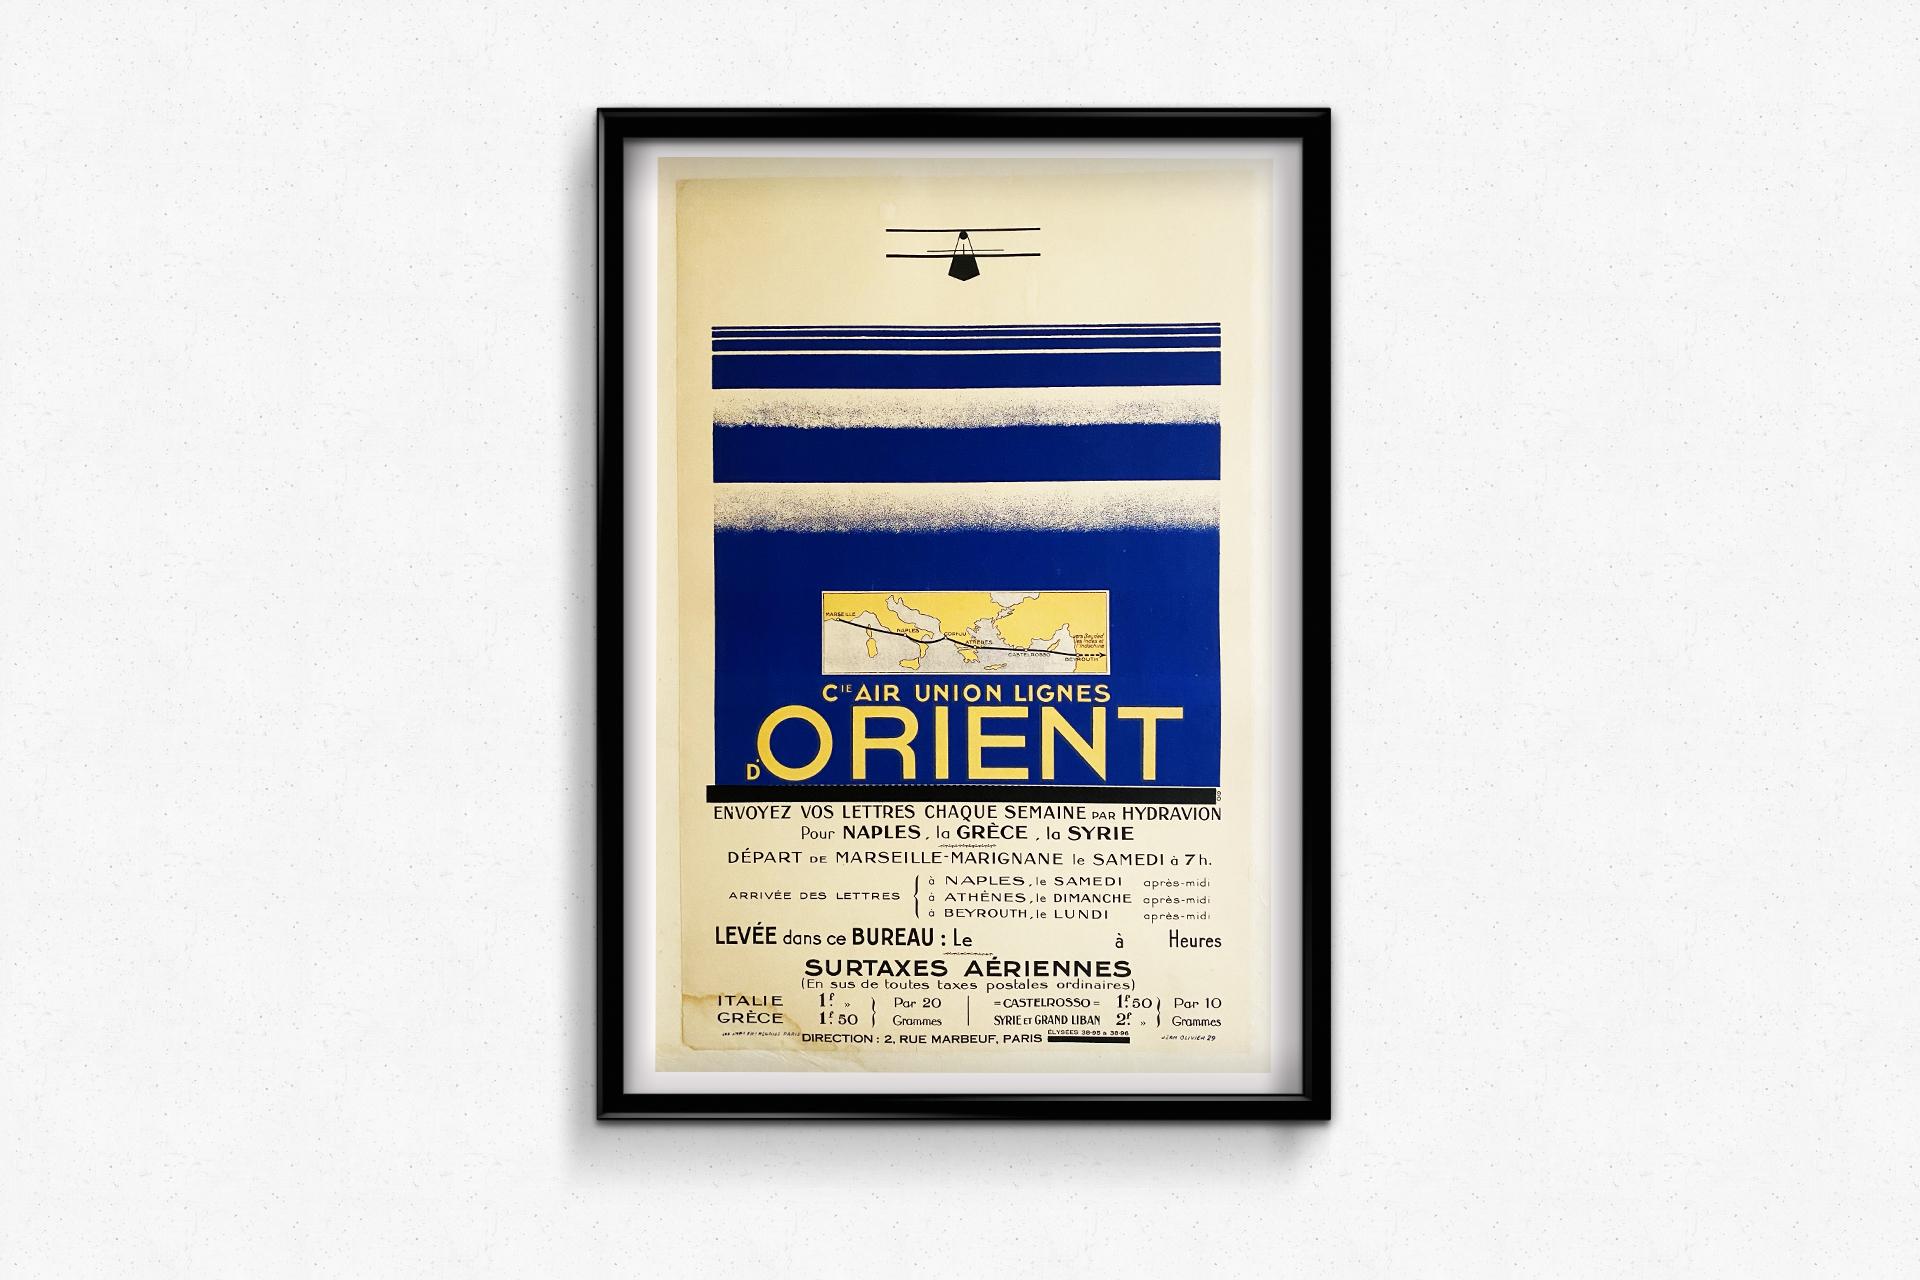 1929 Original poster by Olivier Jean for the airline Air Union lignes d'orient For Sale 1